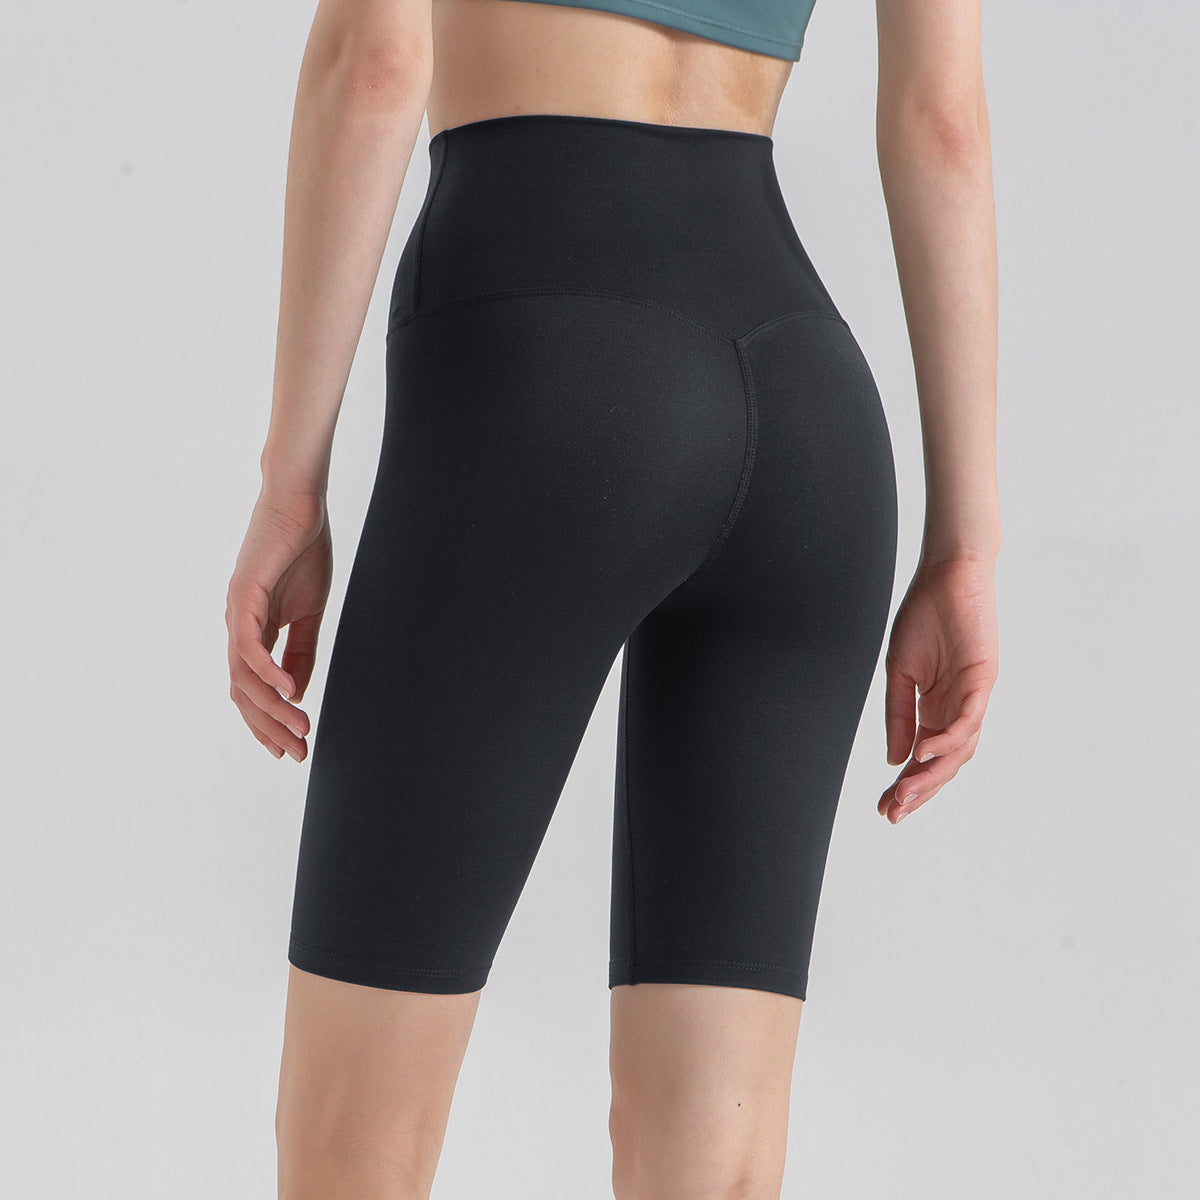 High Waist Hip Lift Nude Feel Yoga Pants Summer Seamless Quick-Drying Skinny Running Five Points Exercise Workout Pants